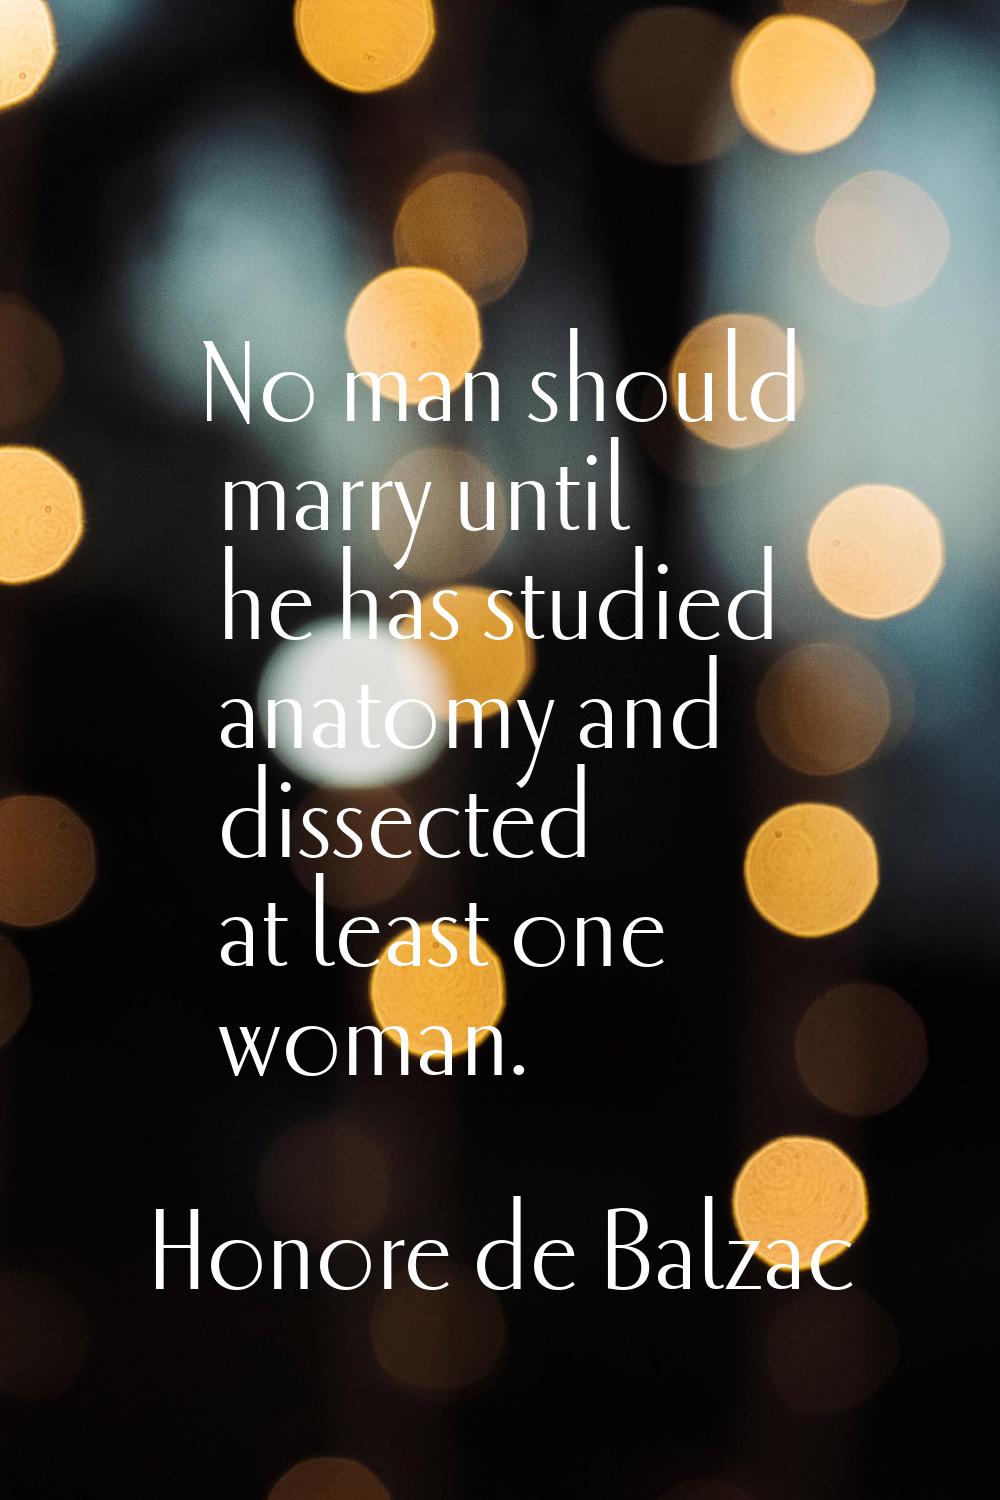 No man should marry until he has studied anatomy and dissected at least one woman.